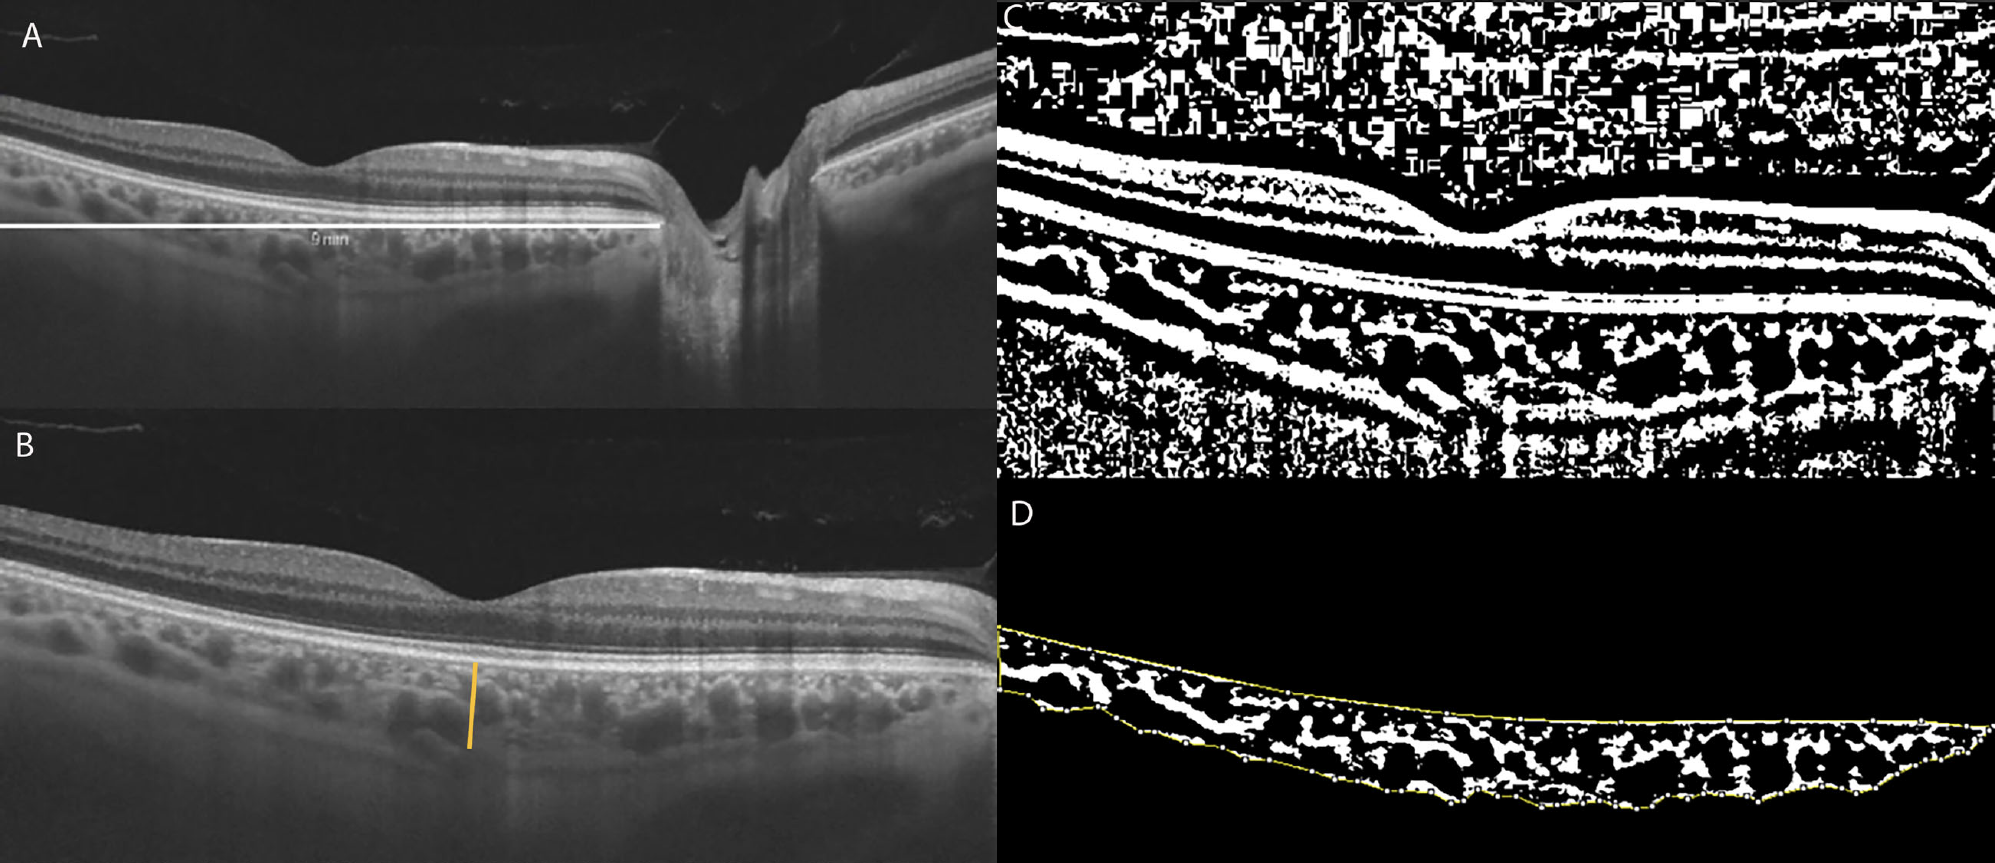 The CVI was the choroidal parameter most highly correlated with BCVA and might be a reliable imaging biomarker for monitoring progression. Dark pixels represent vessels’ luminal area and the white pixels the stromal area. Total luminal area divided by total choroidal area represents the CVI.